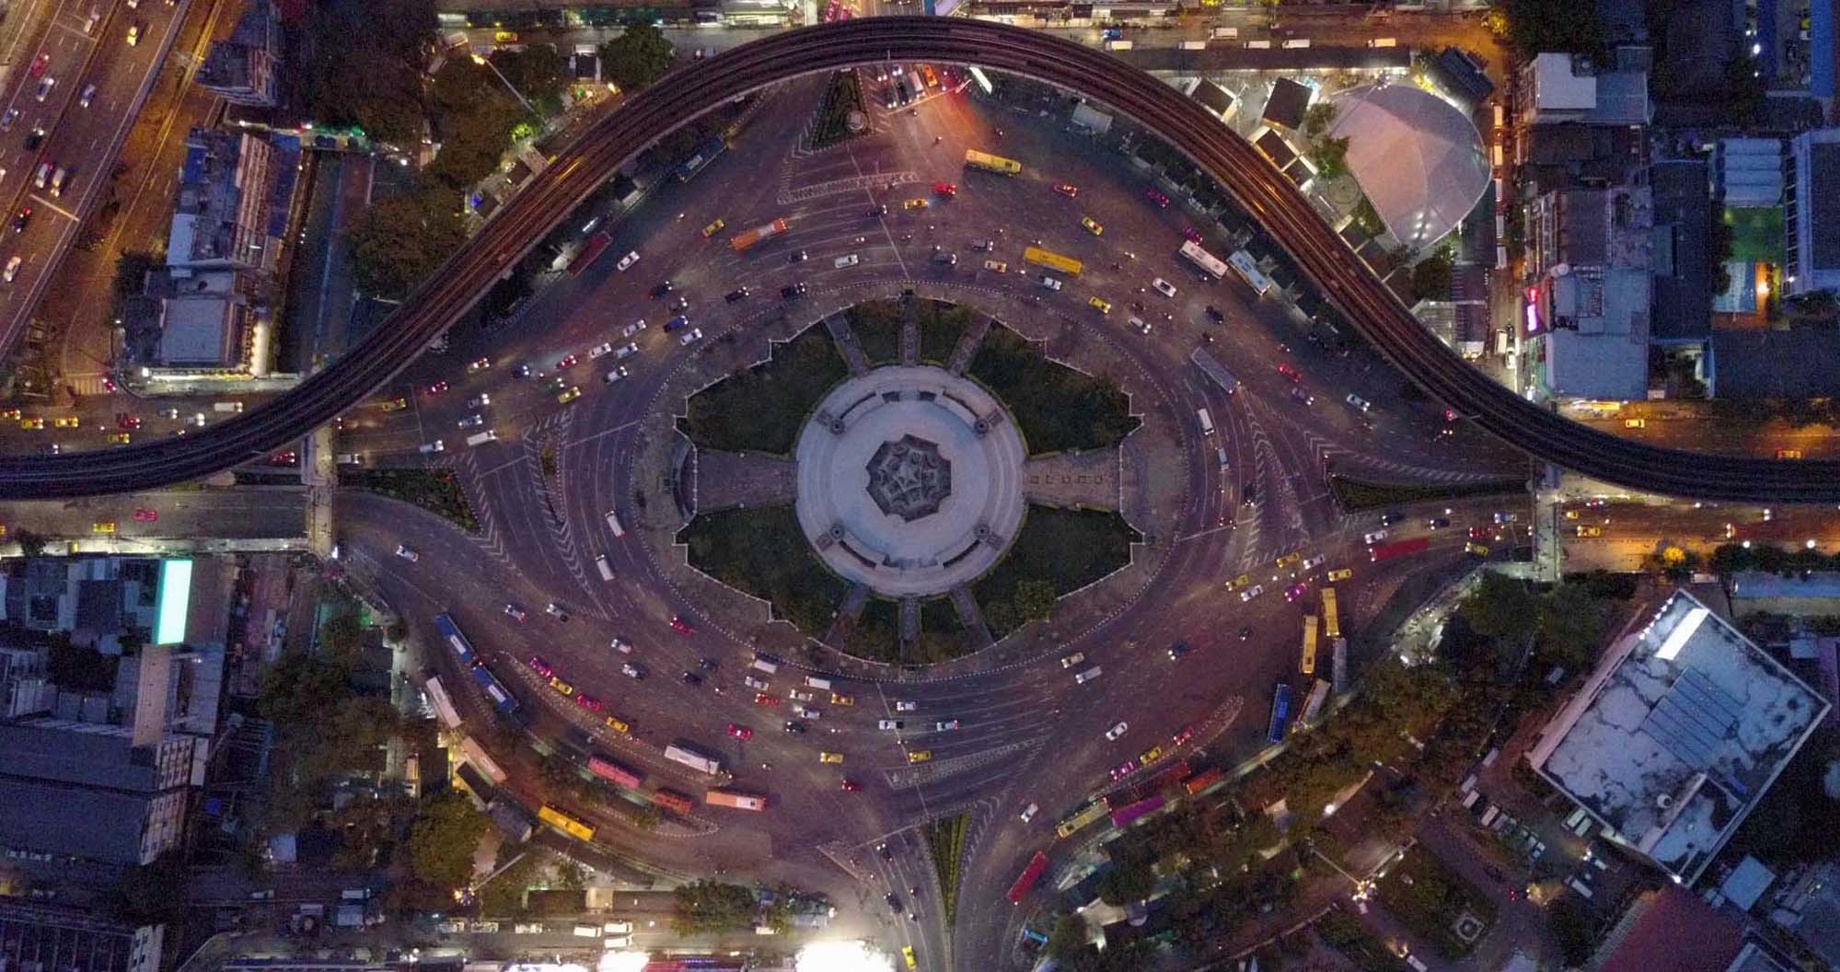 A birds-eye view of a large, busy roundabout in a city